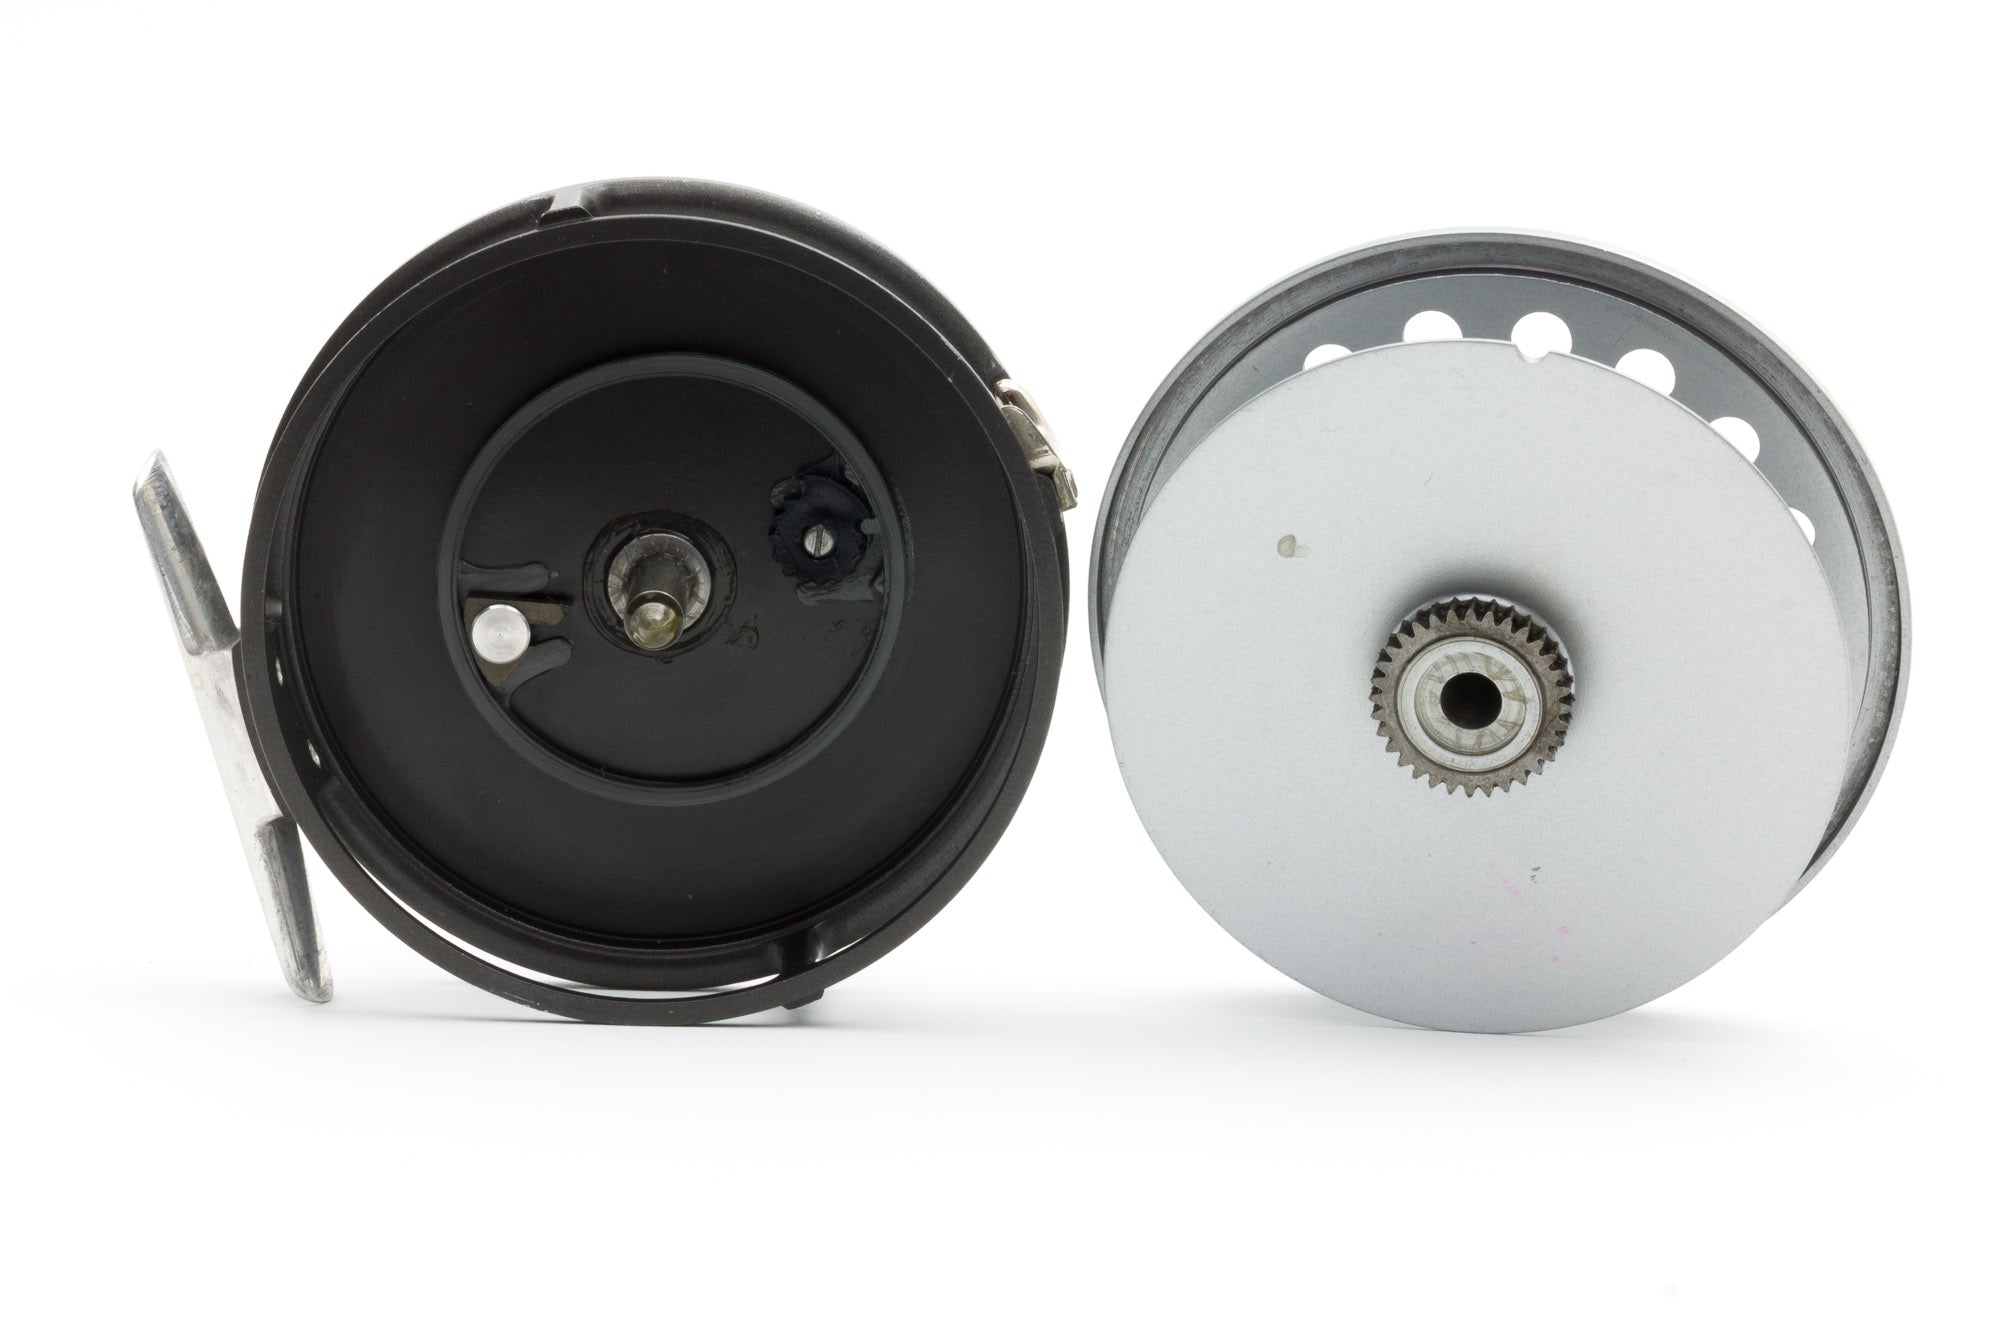 SYSTEM 6 FLY Reel, Hardy Marquis $119.00 - PicClick